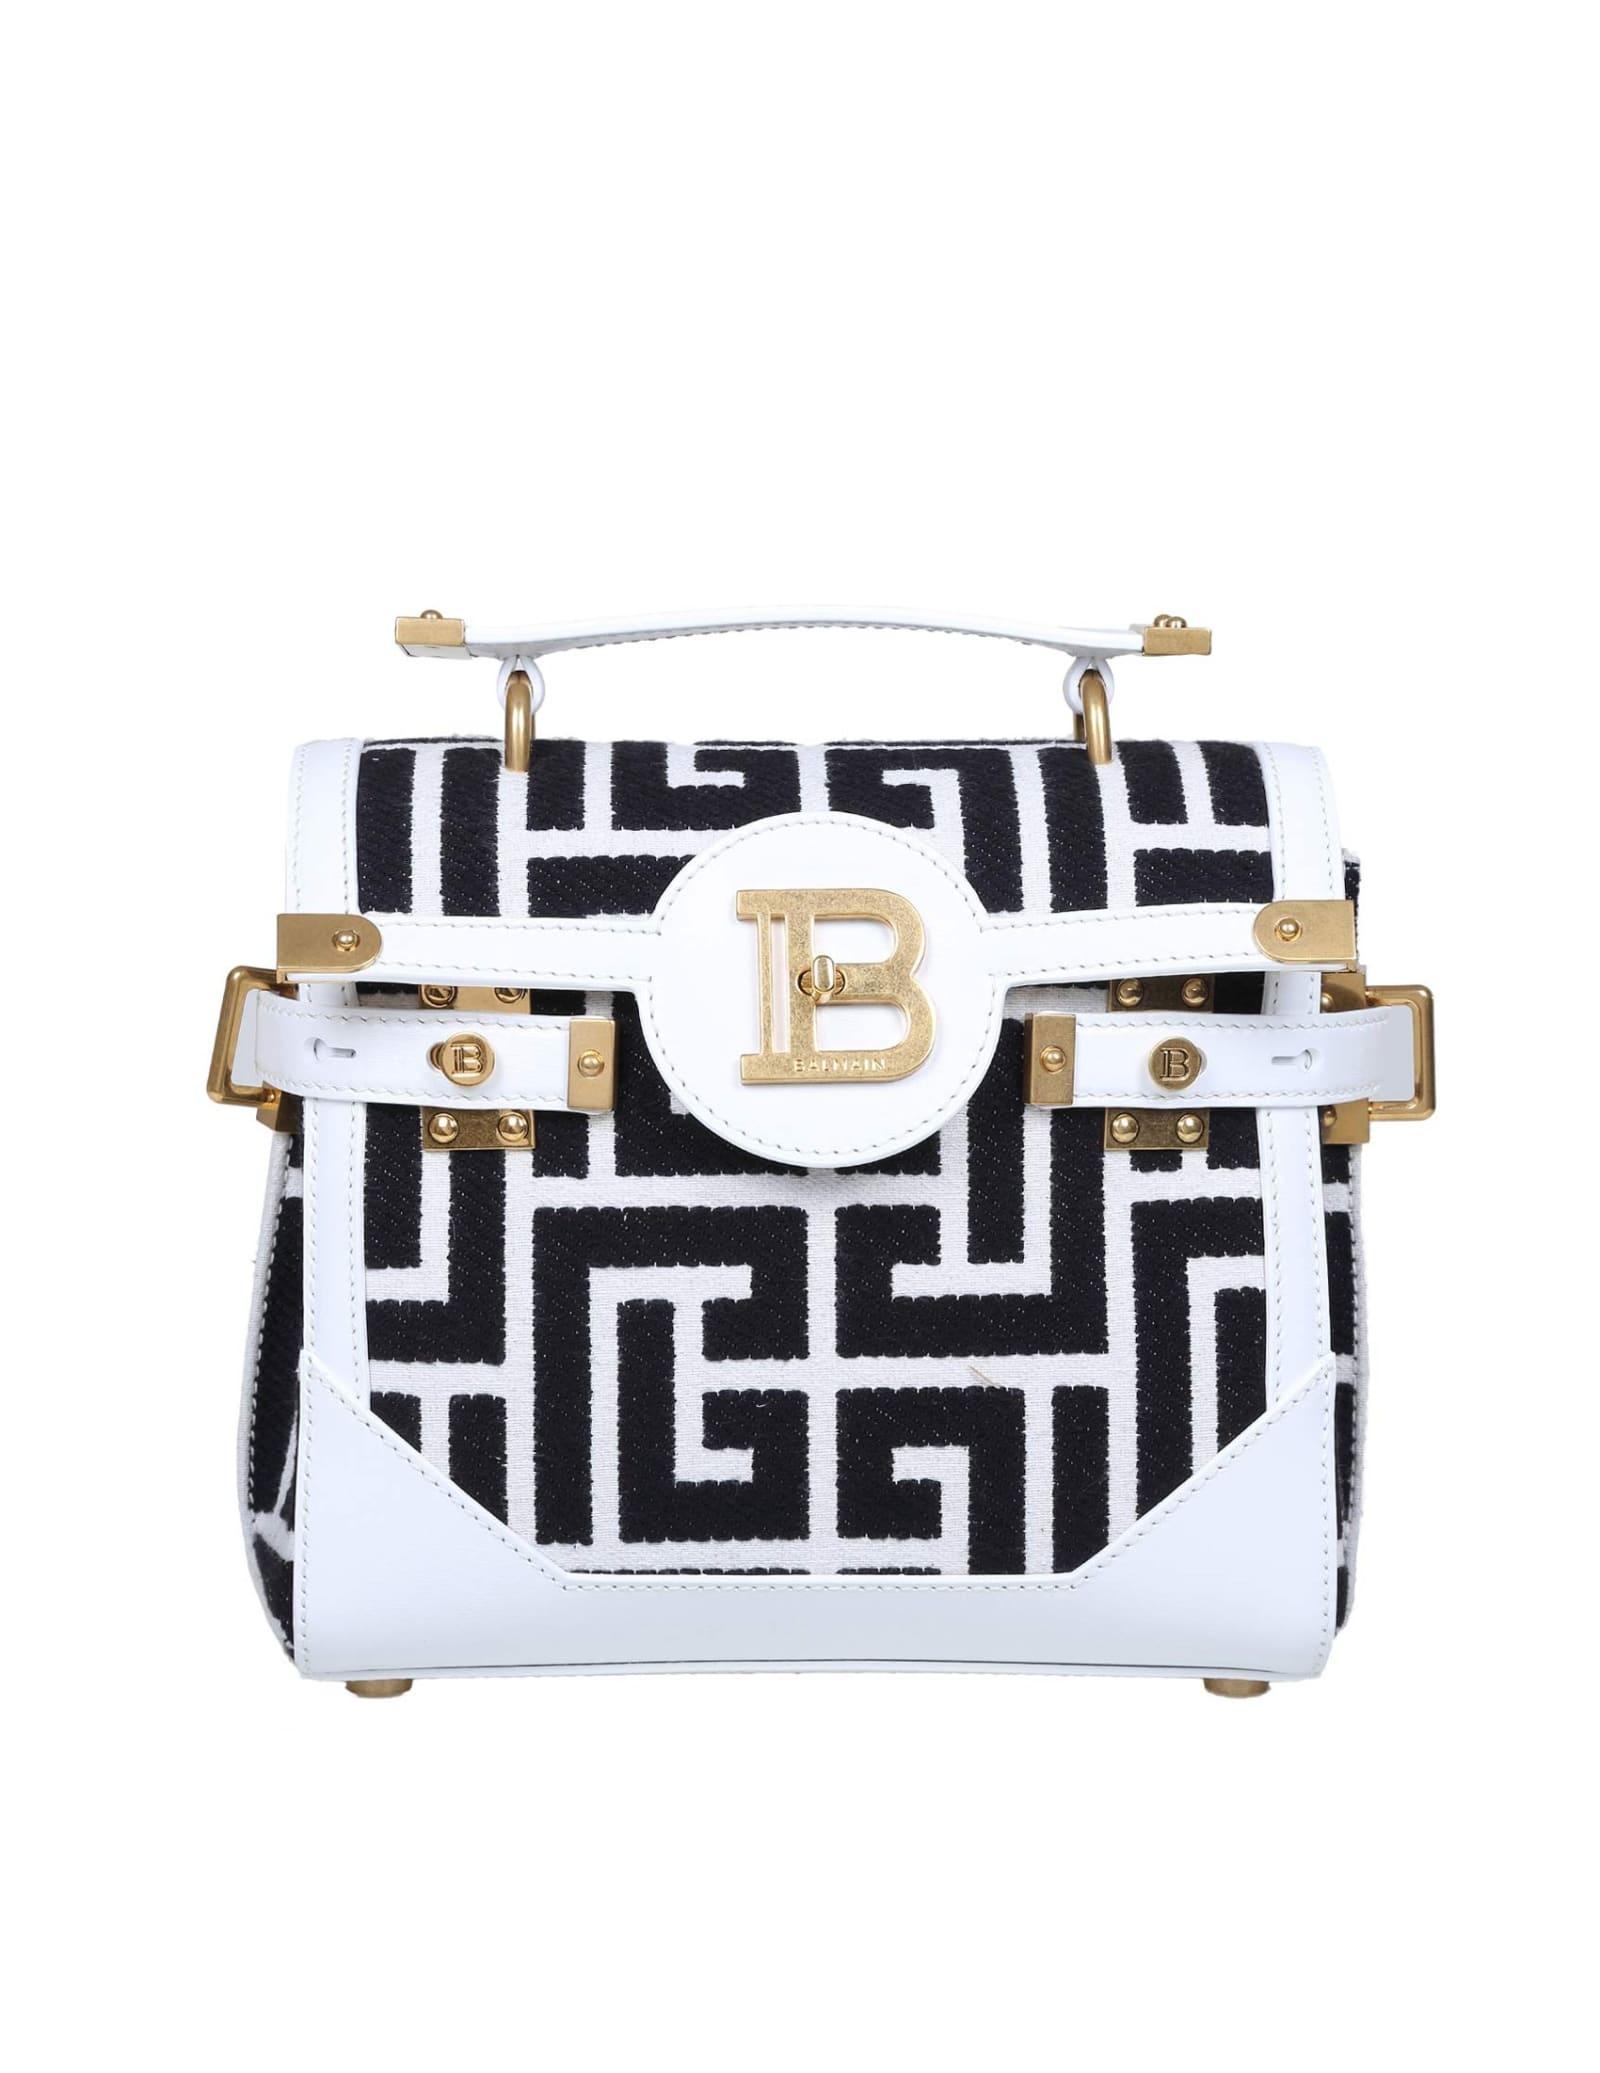 Balmain B-buzz 23 Bag In Jacquard And Leather in White/Black 